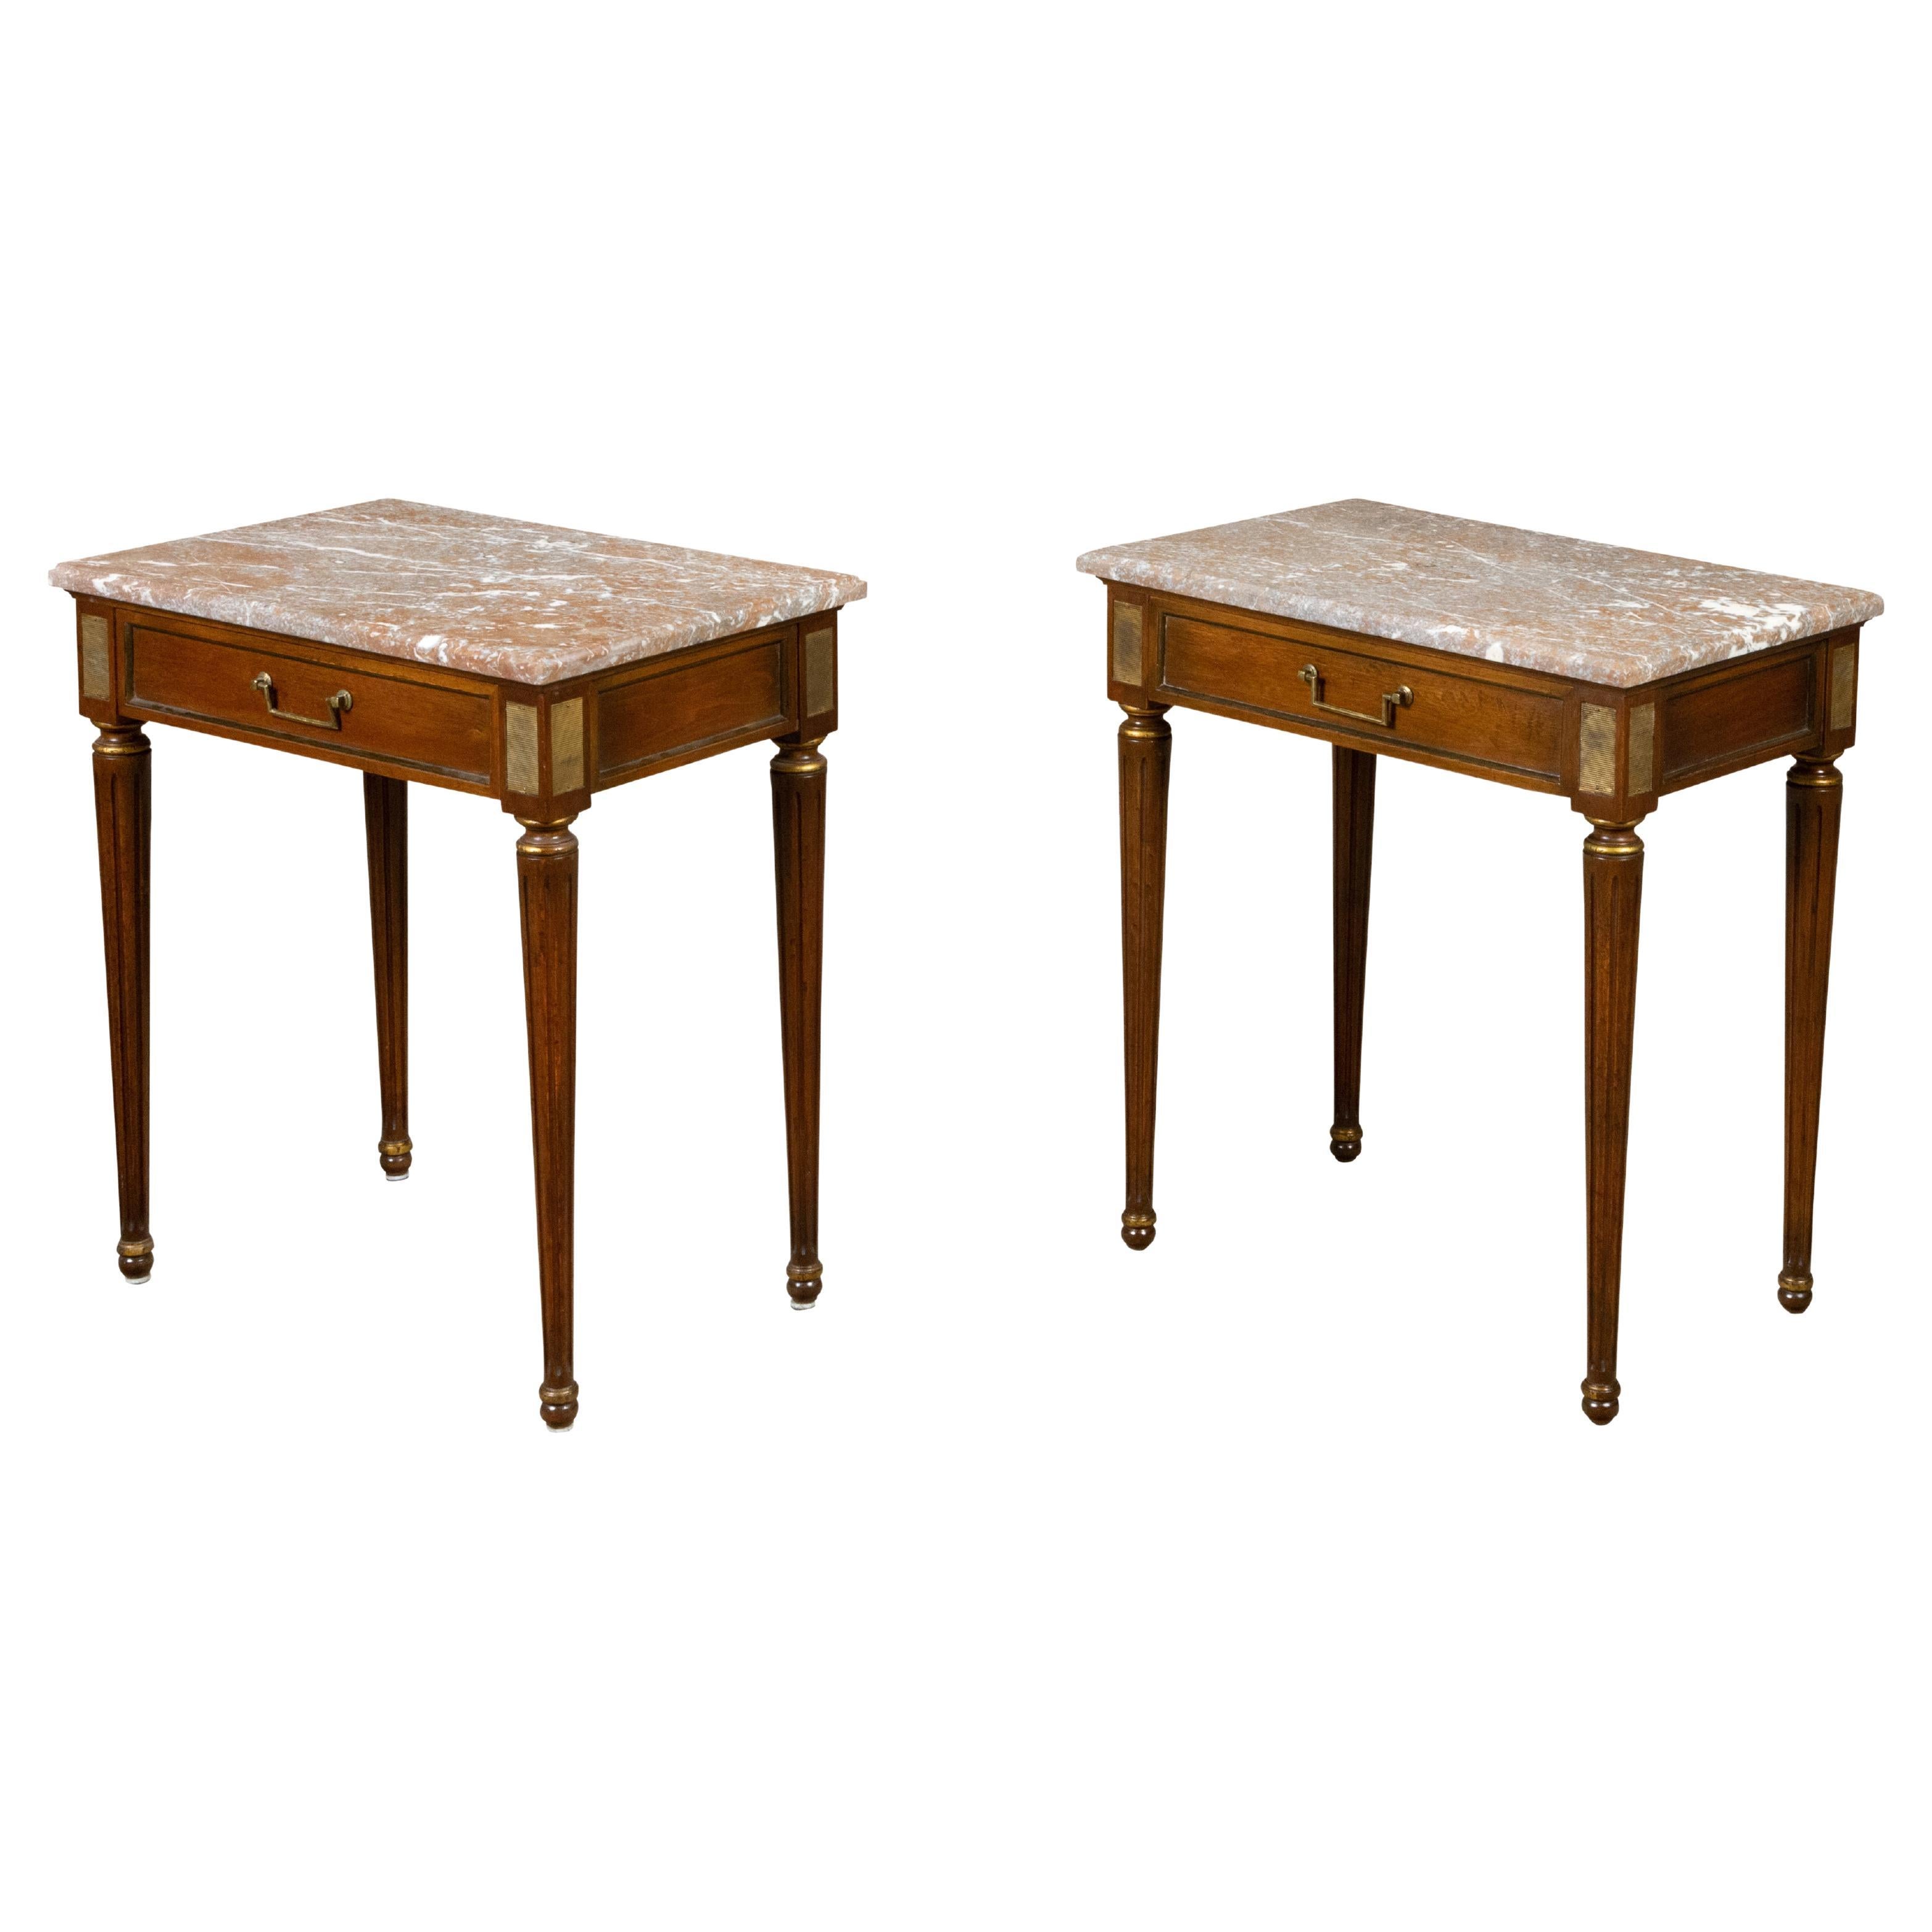 Pair of French Neoclassical Style Walnut Console Tables with Marble Tops